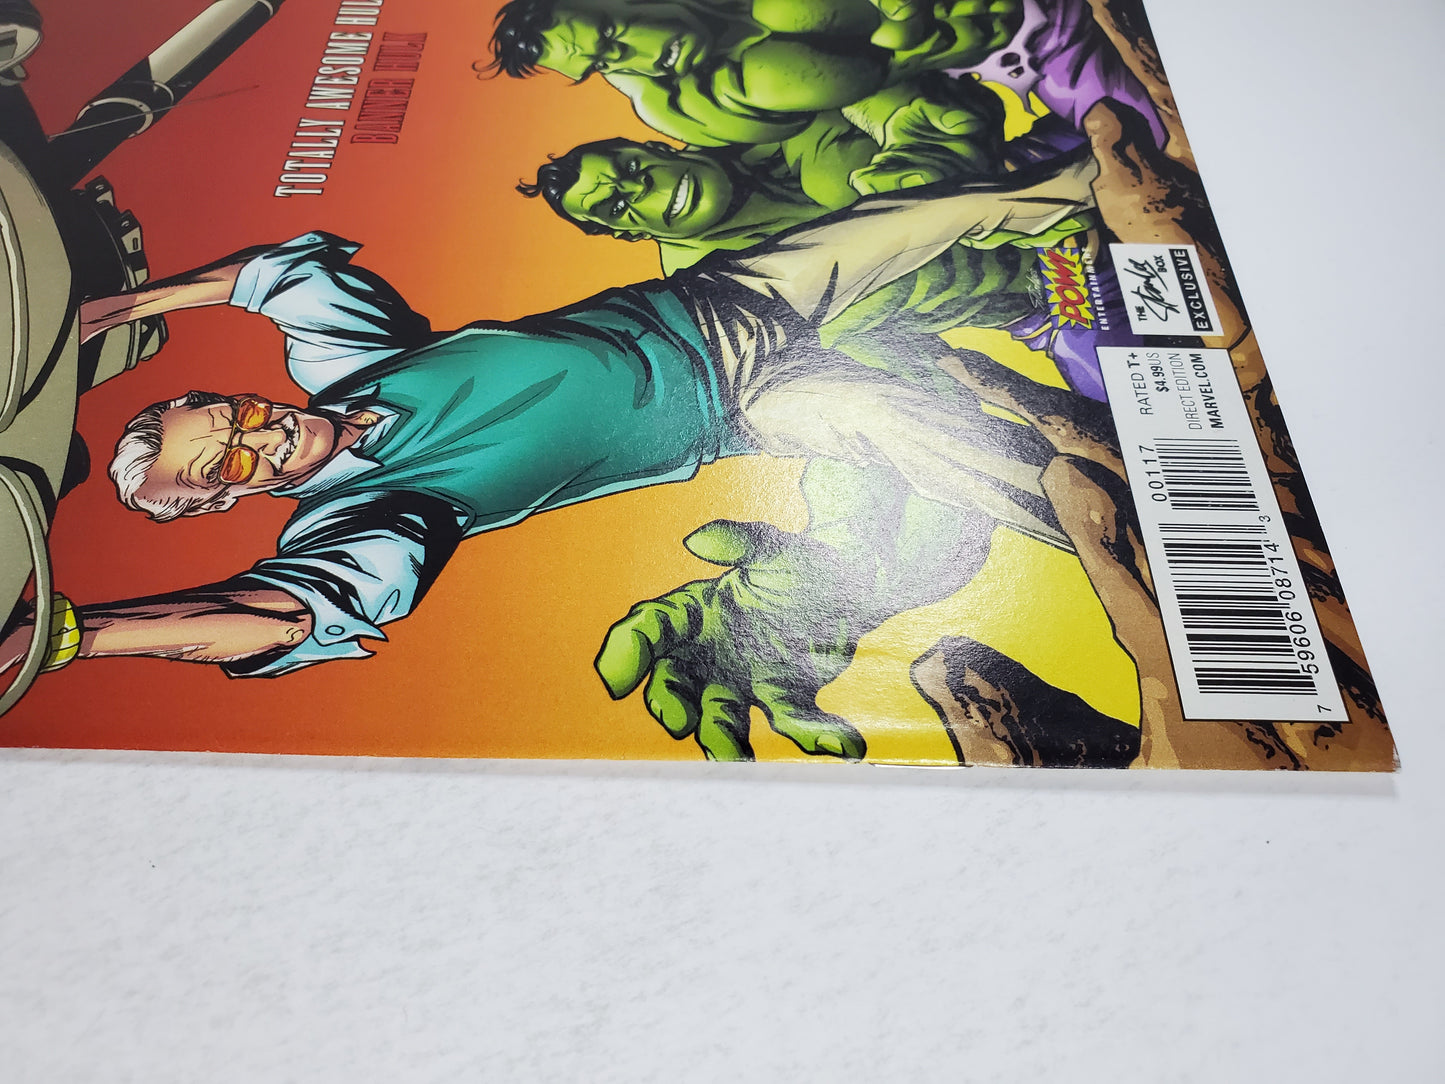 Marvel Generations: Banner Hulk & The Totally Awesome Hulk Vol 1 #1 Variant